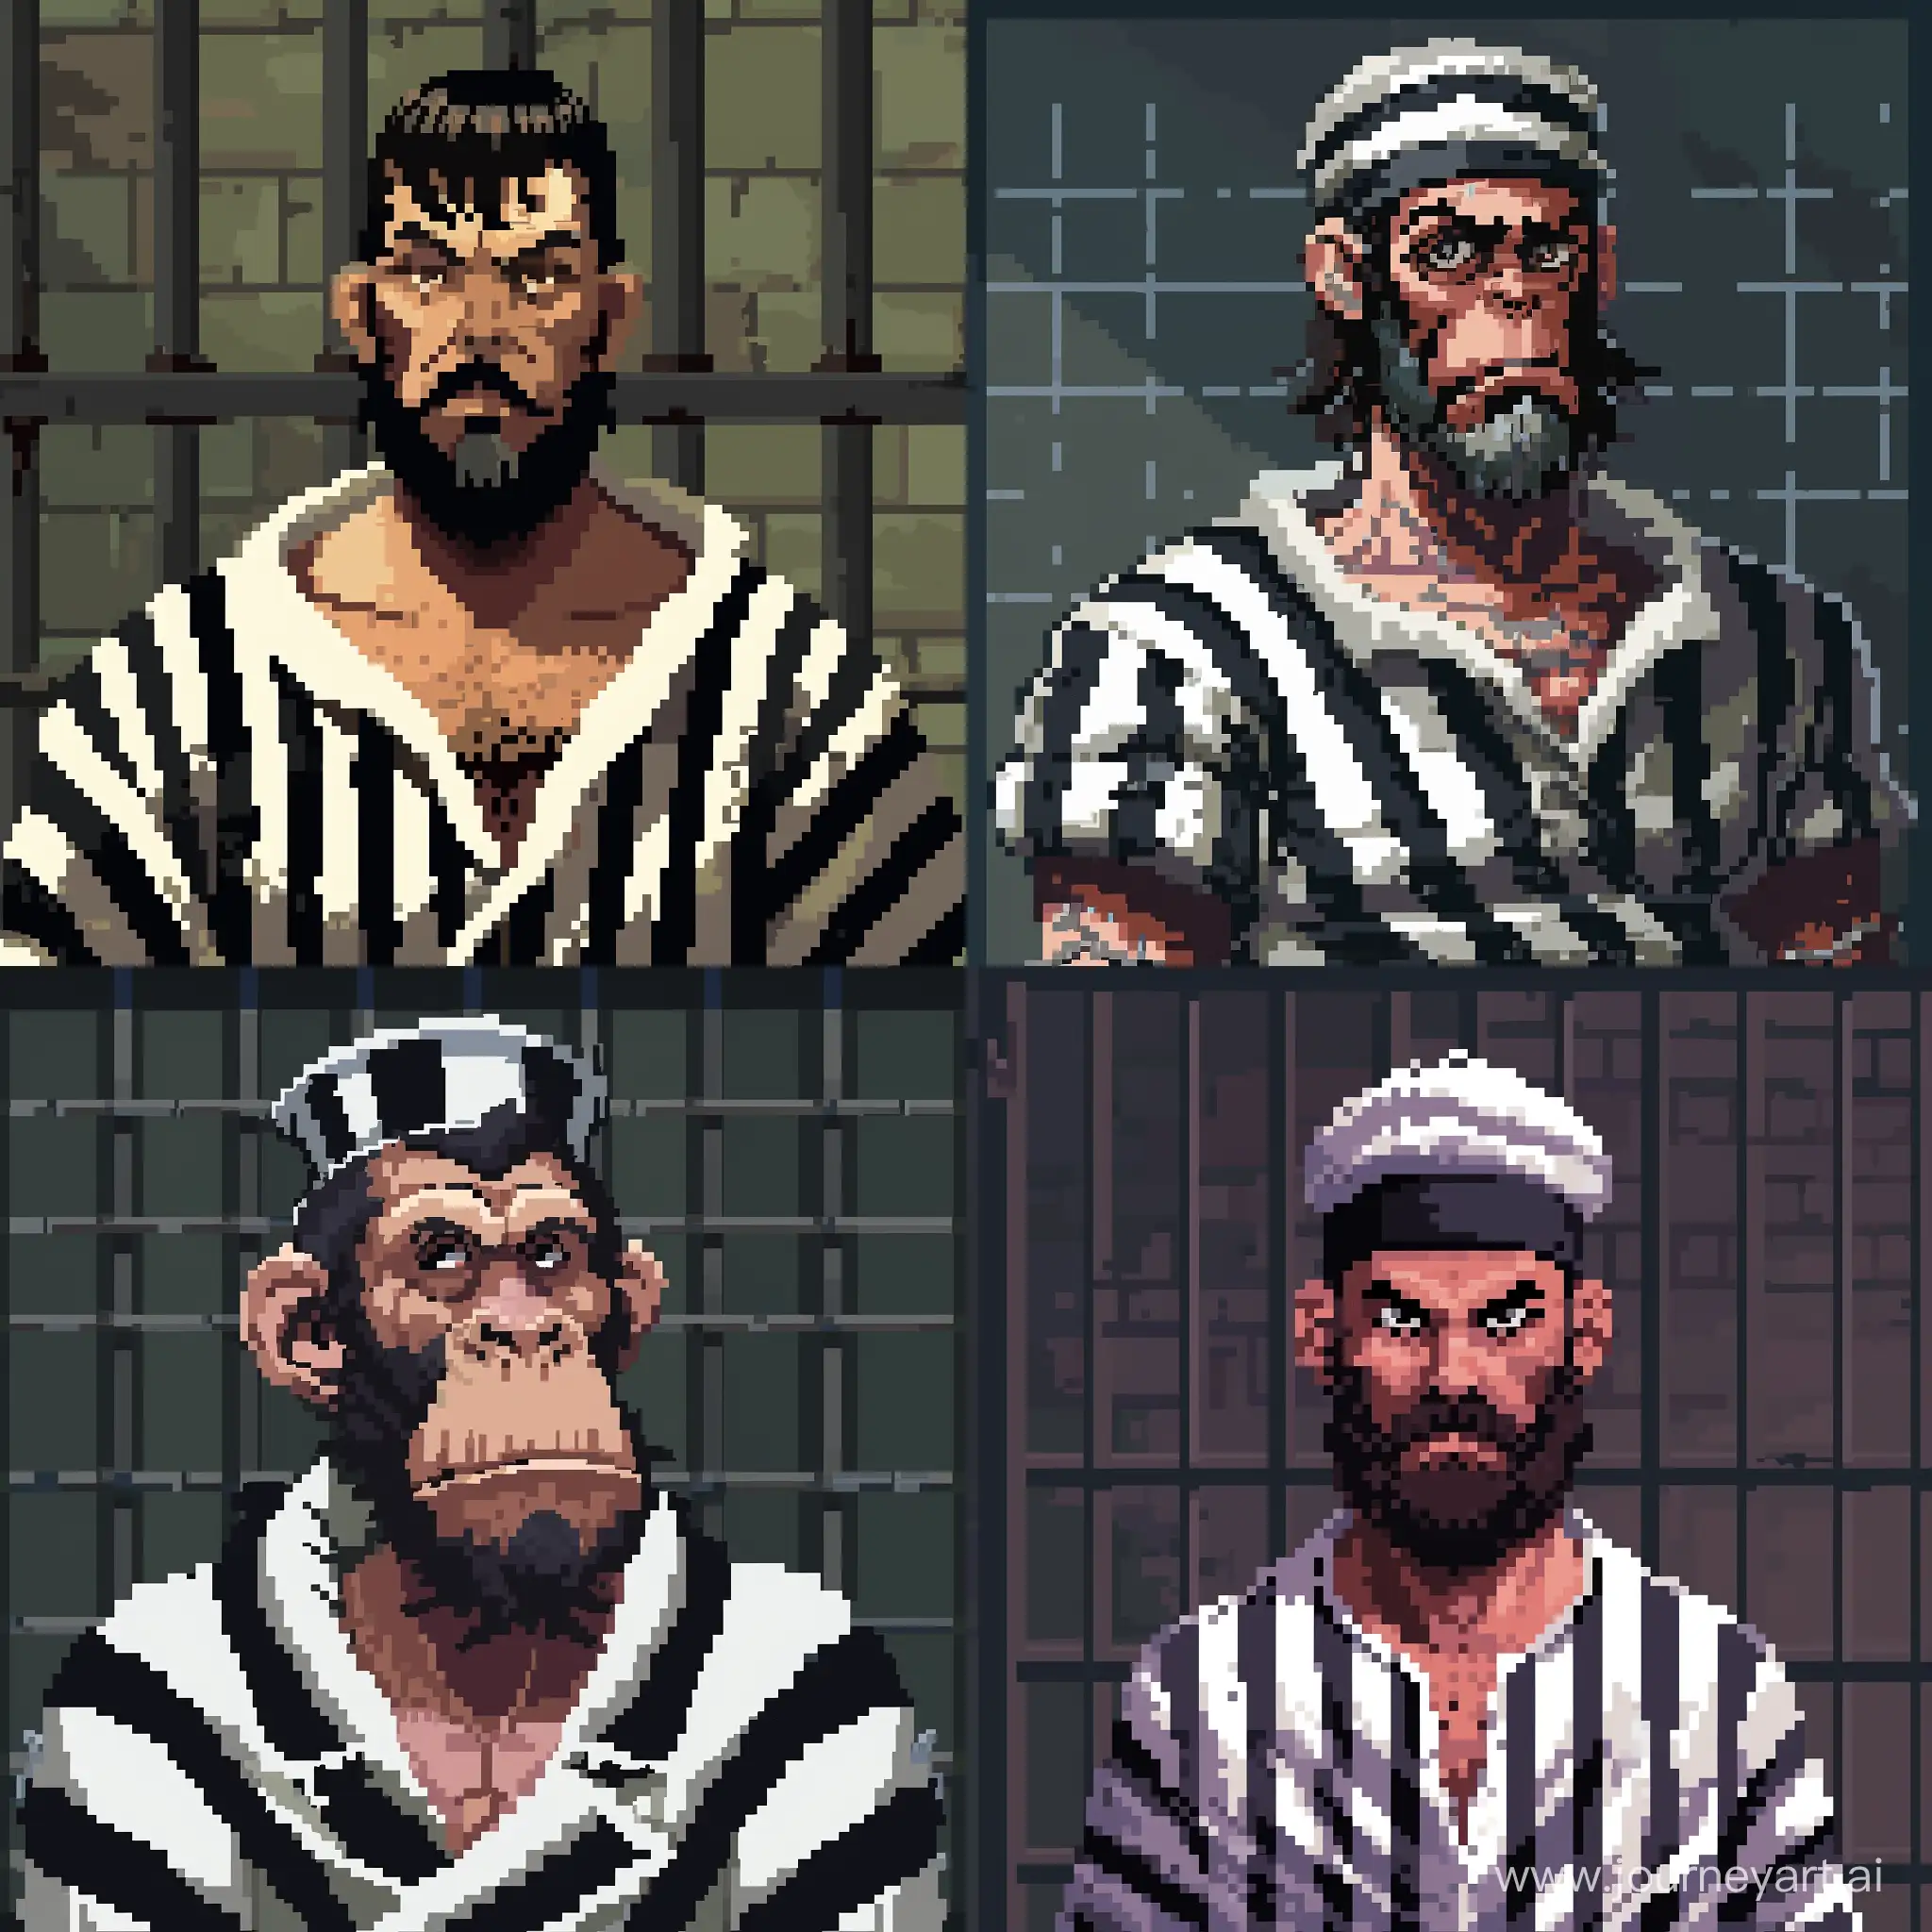 Pixel-Art-Depicting-Charles-Hoskinson-in-Striped-Prison-Clothing-on-Monkey-Island